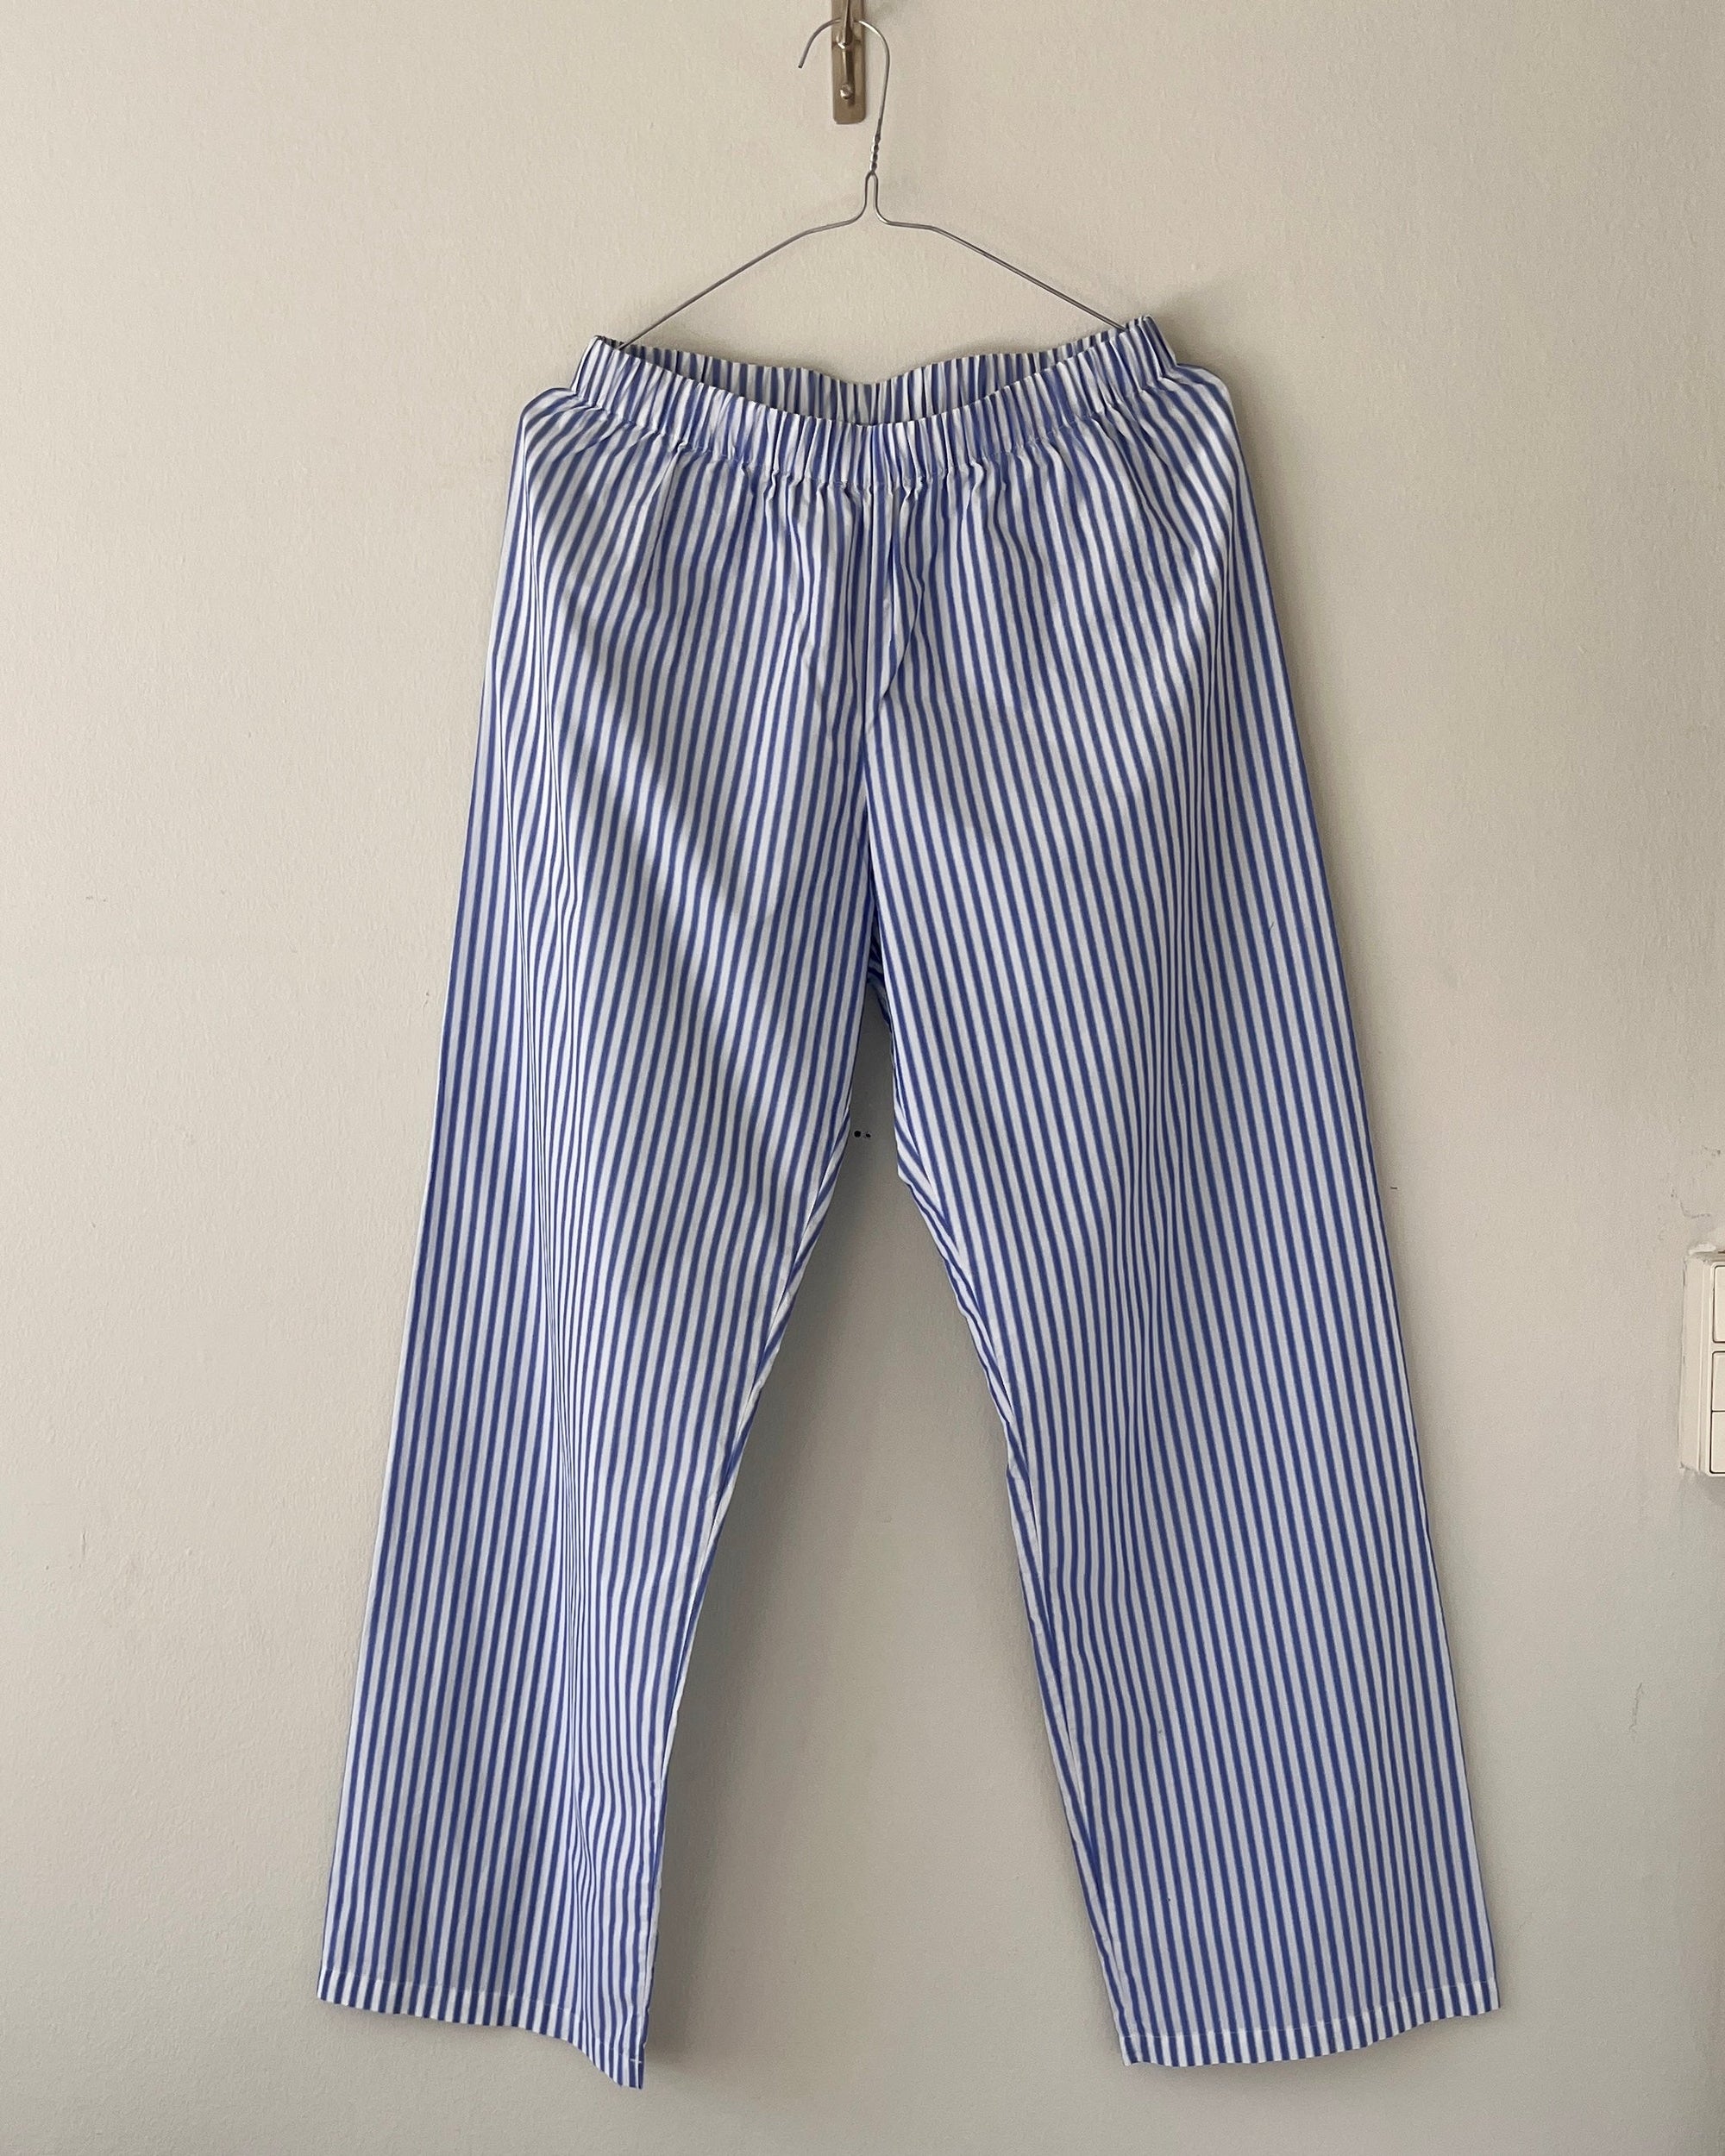 Sewing Project No. 01: Favorite Pants